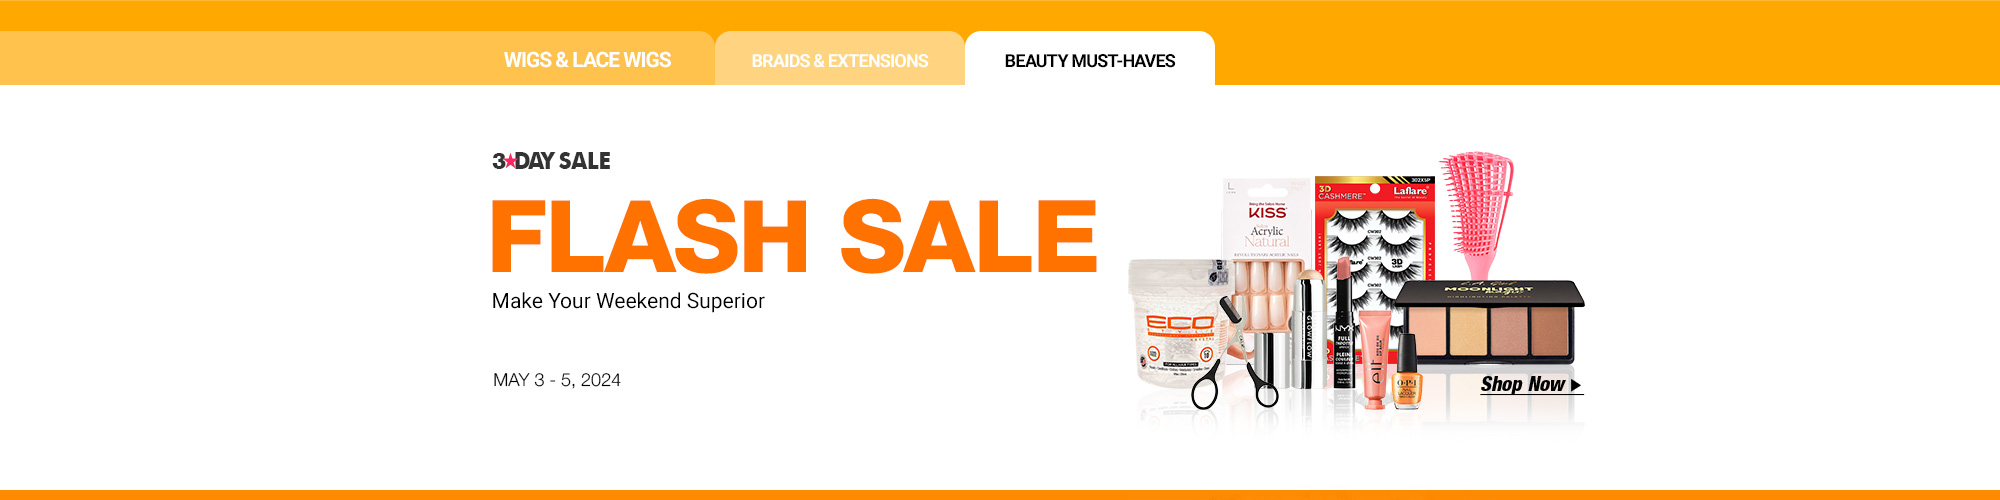 FLASH SALE - BEAUTY MUST HAVES